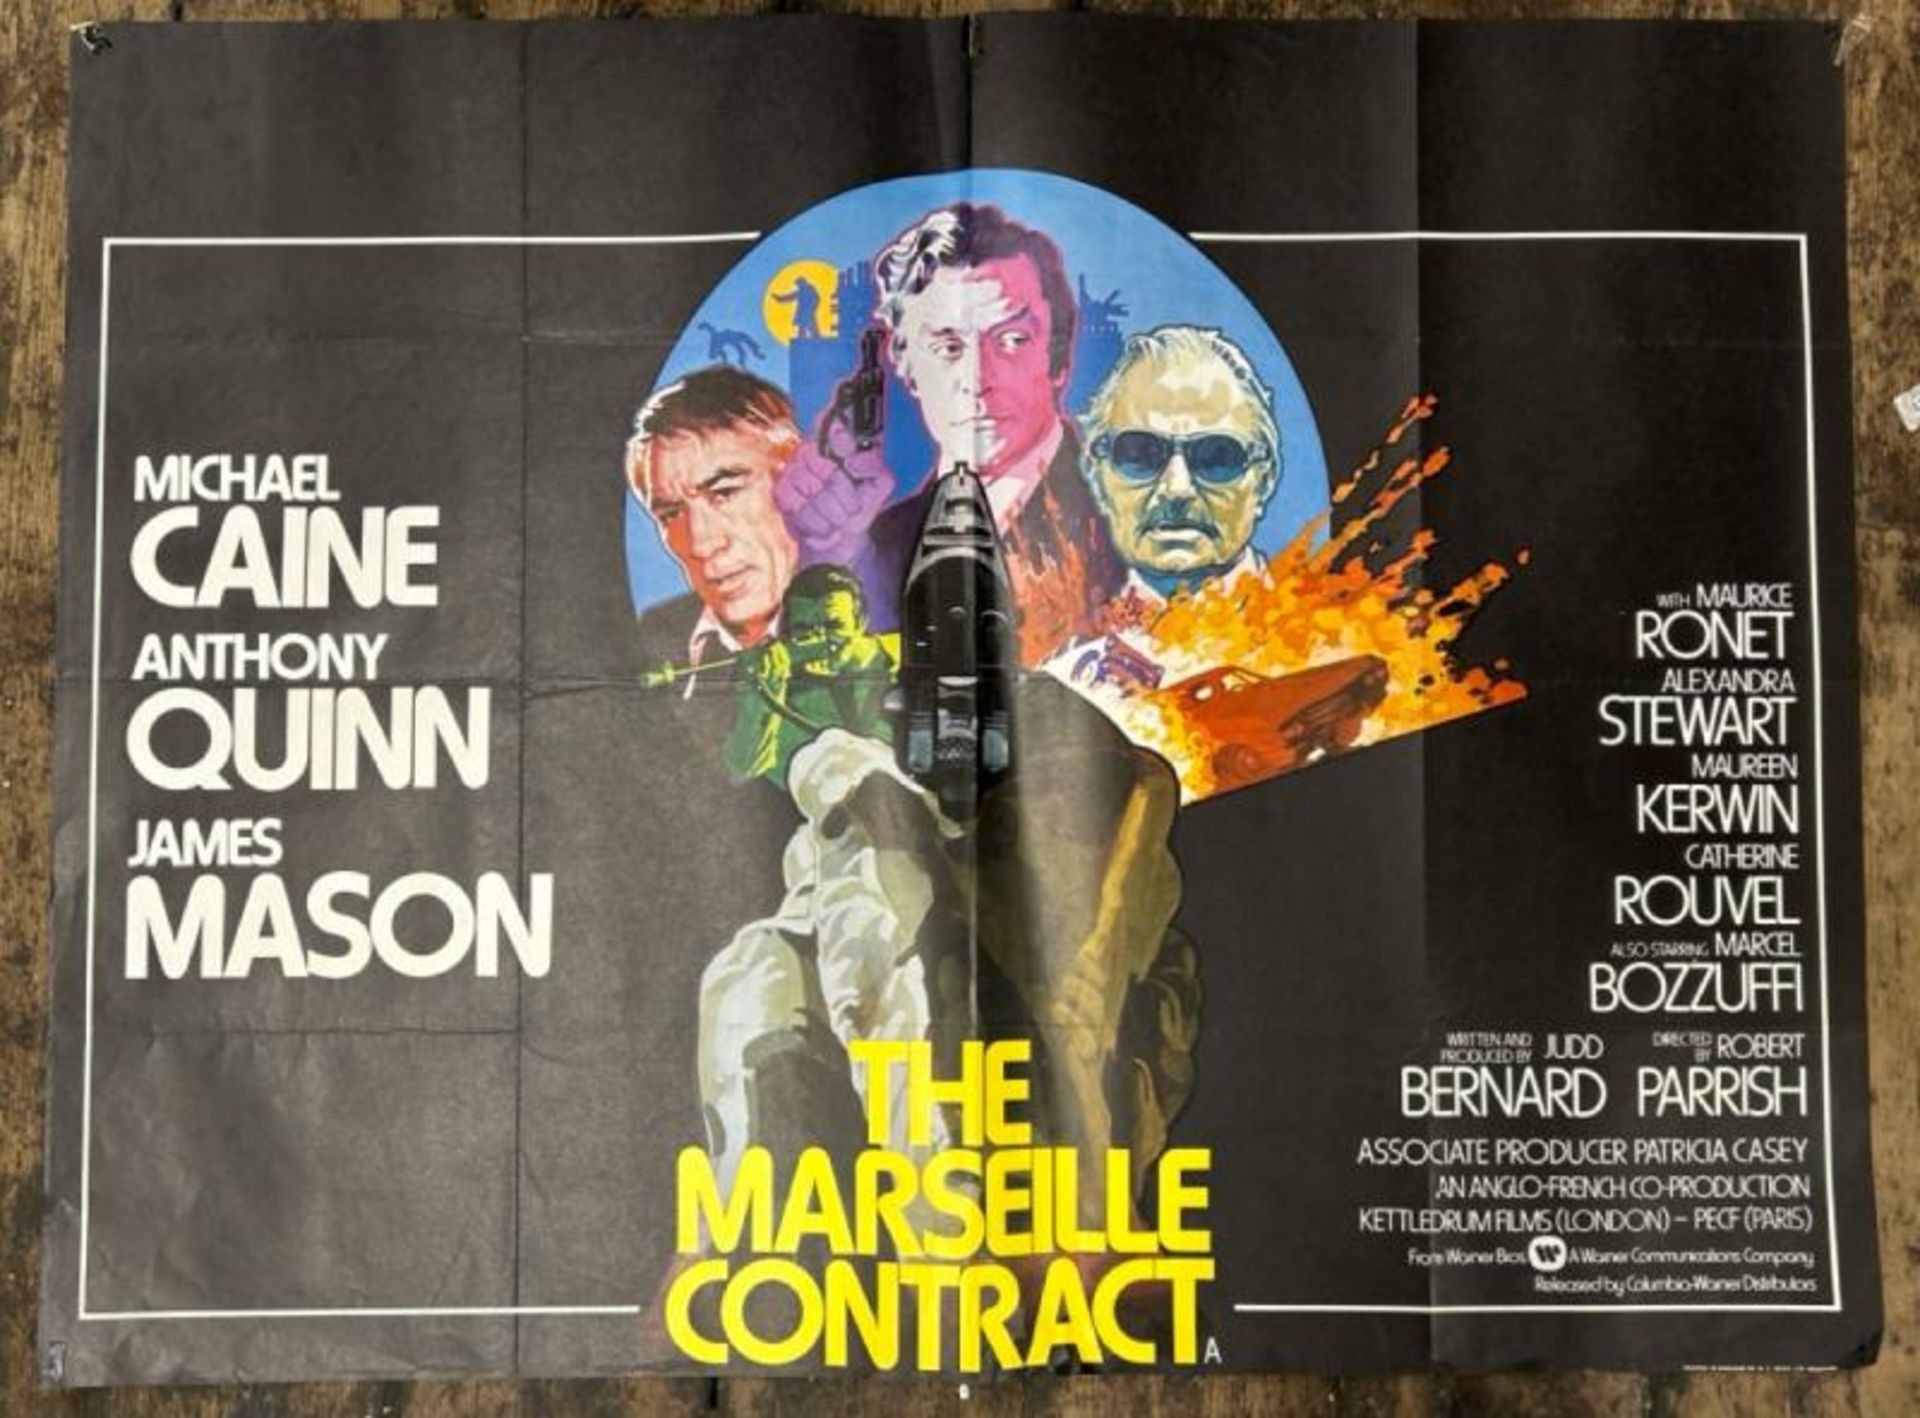 THE MARSEILLE CONTRACT STARRING MICHAEL CAINE, ANTHONY QUINN, JAMES MASON, ORIGINAL FILM POSTER,